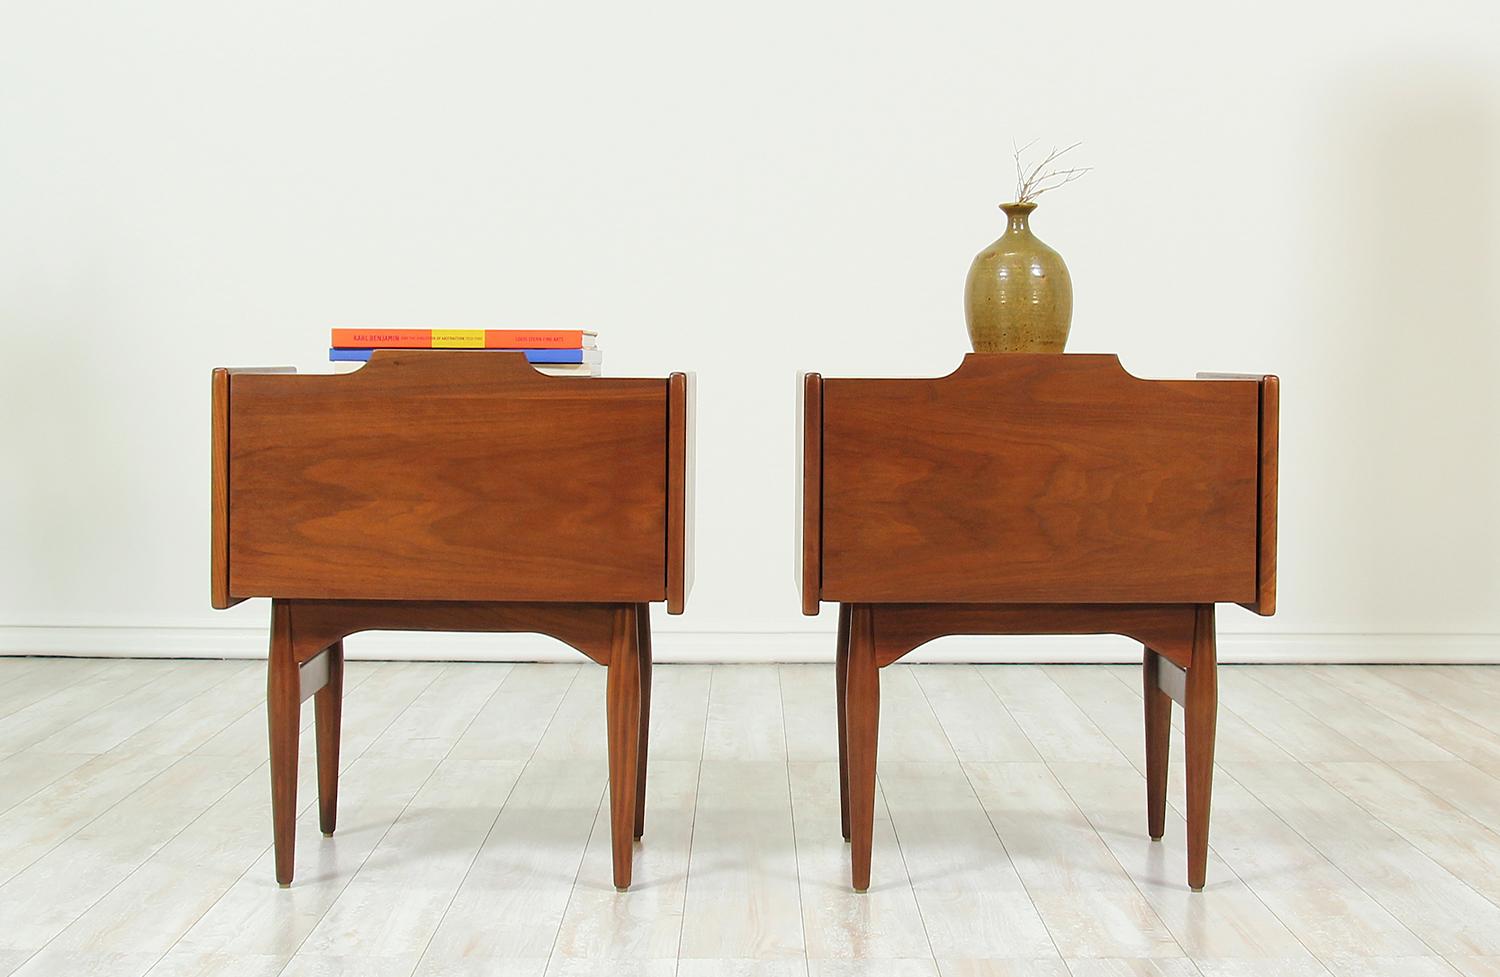 Pair of nightstands designed by John Caldwell for Brown Saltman in the California in 1965. Created as part of the Today line for Brown Saltman, this stunning pair of nightstands are comprised of walnut wood and sit on four tapered legs with a